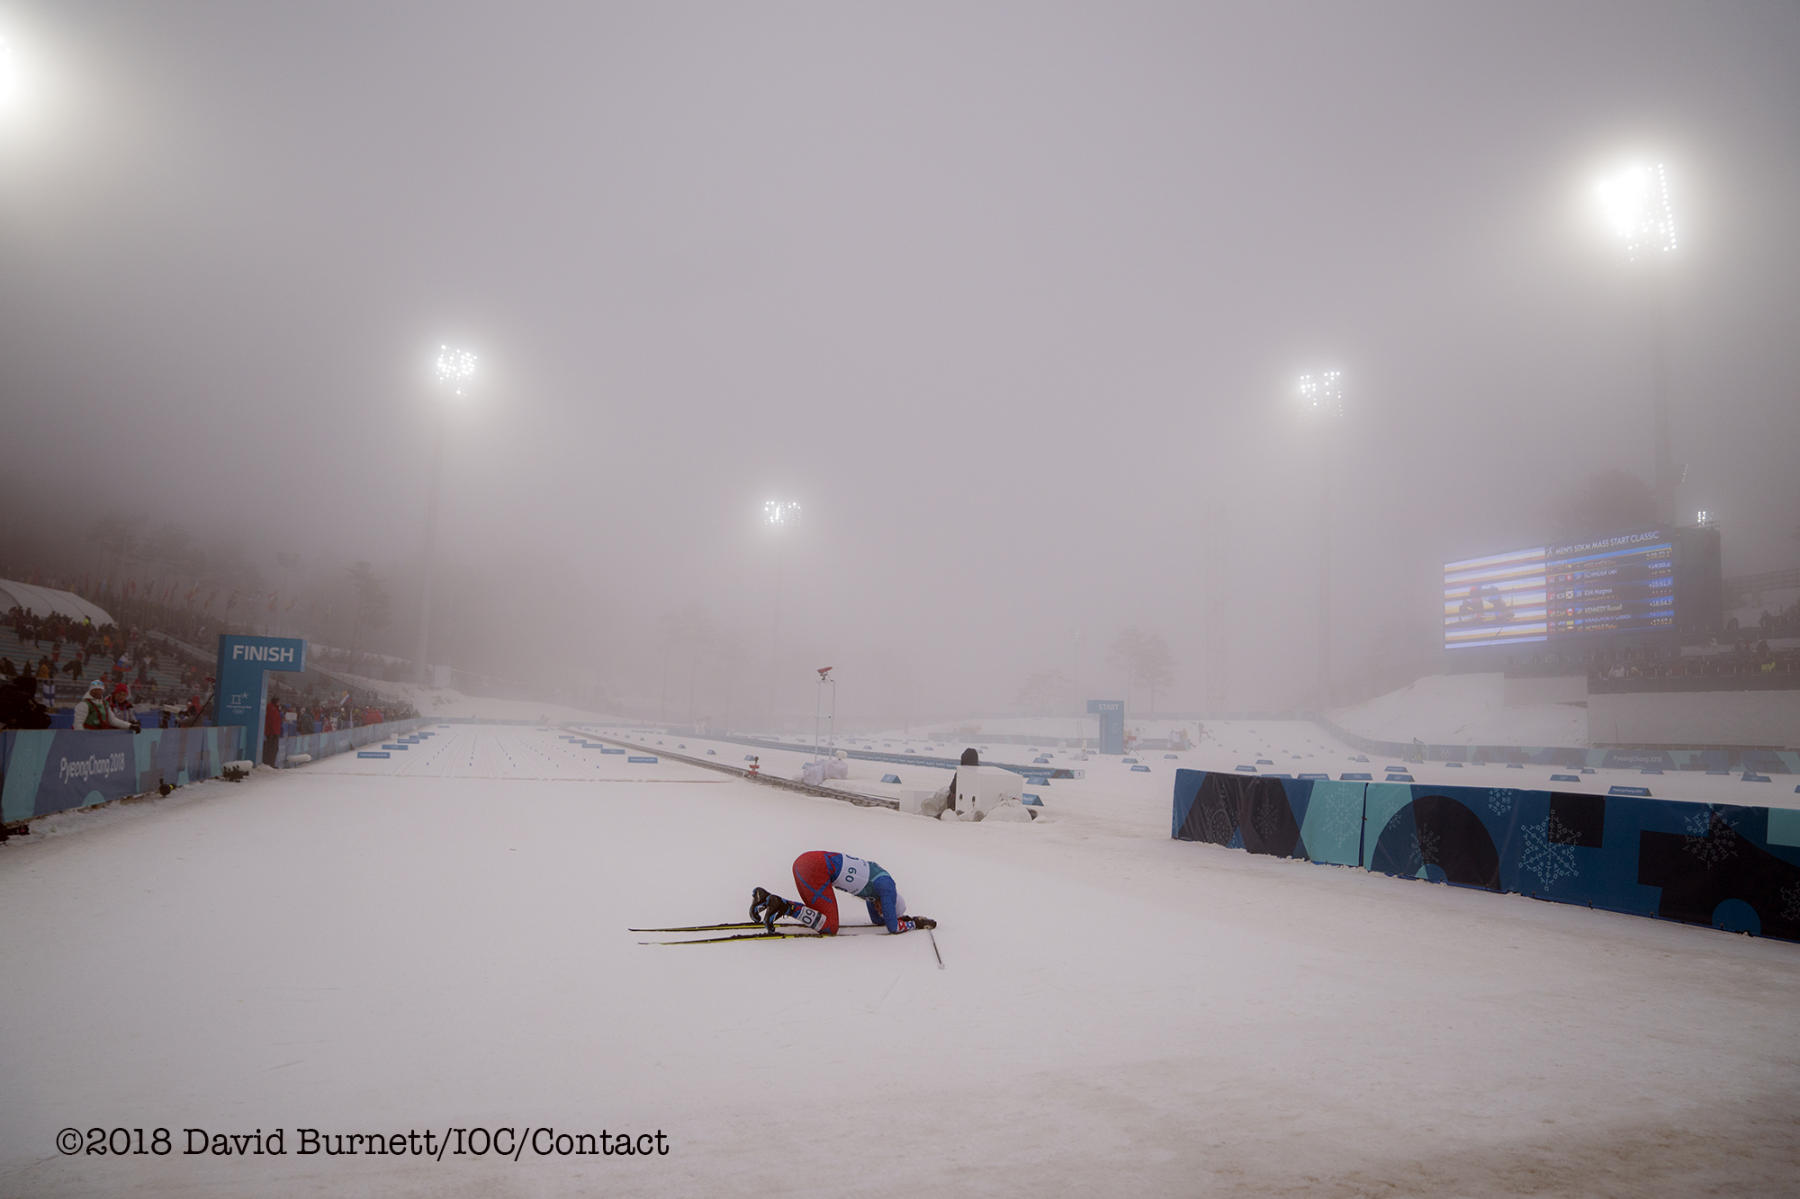 He left it all out on the course.  Spent, at the end of the 50km race : Pyeongchang 2018 Winter Games : David Burnett | Photographer